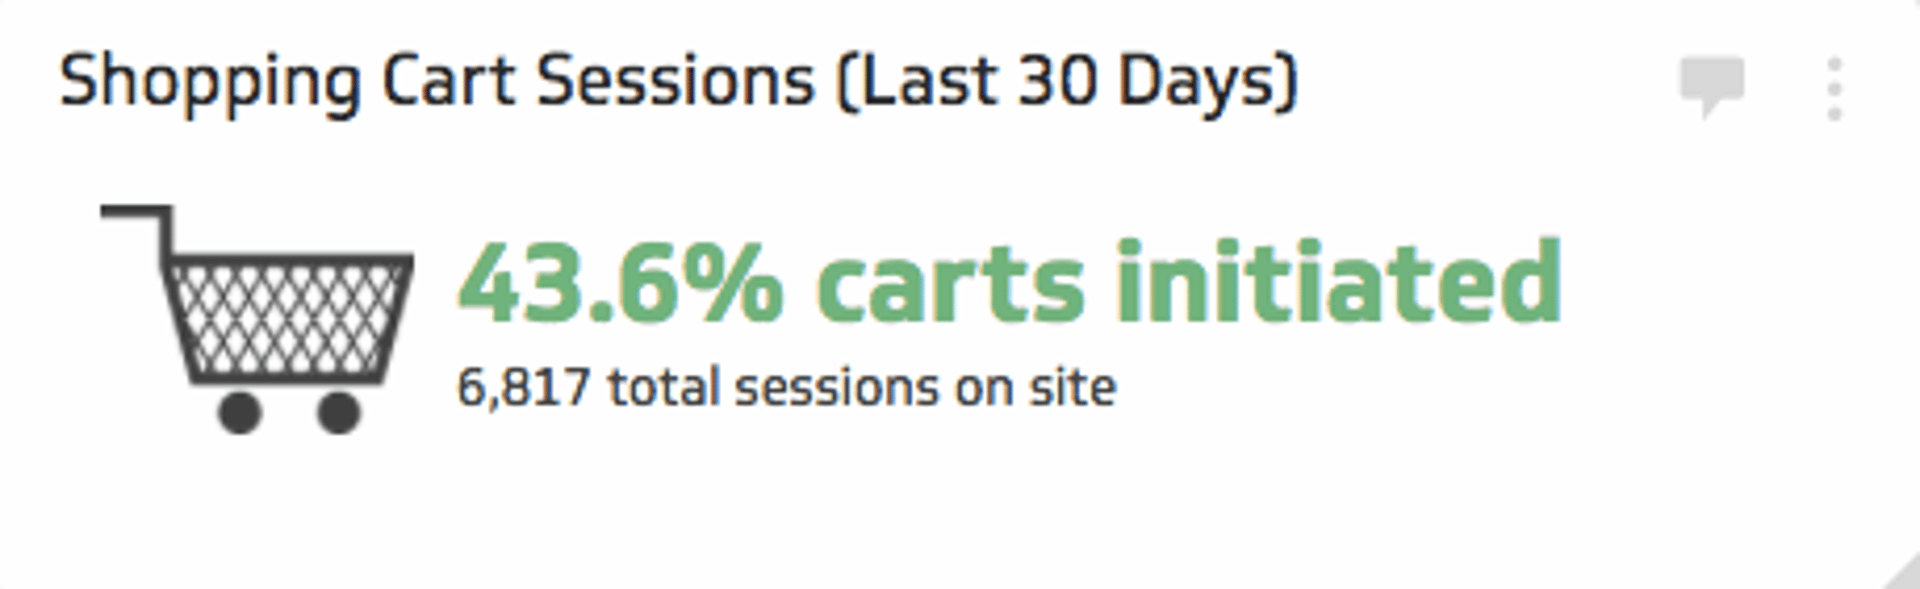 Ecommerce KPI Examples - Shopping Cart Sessions Metric